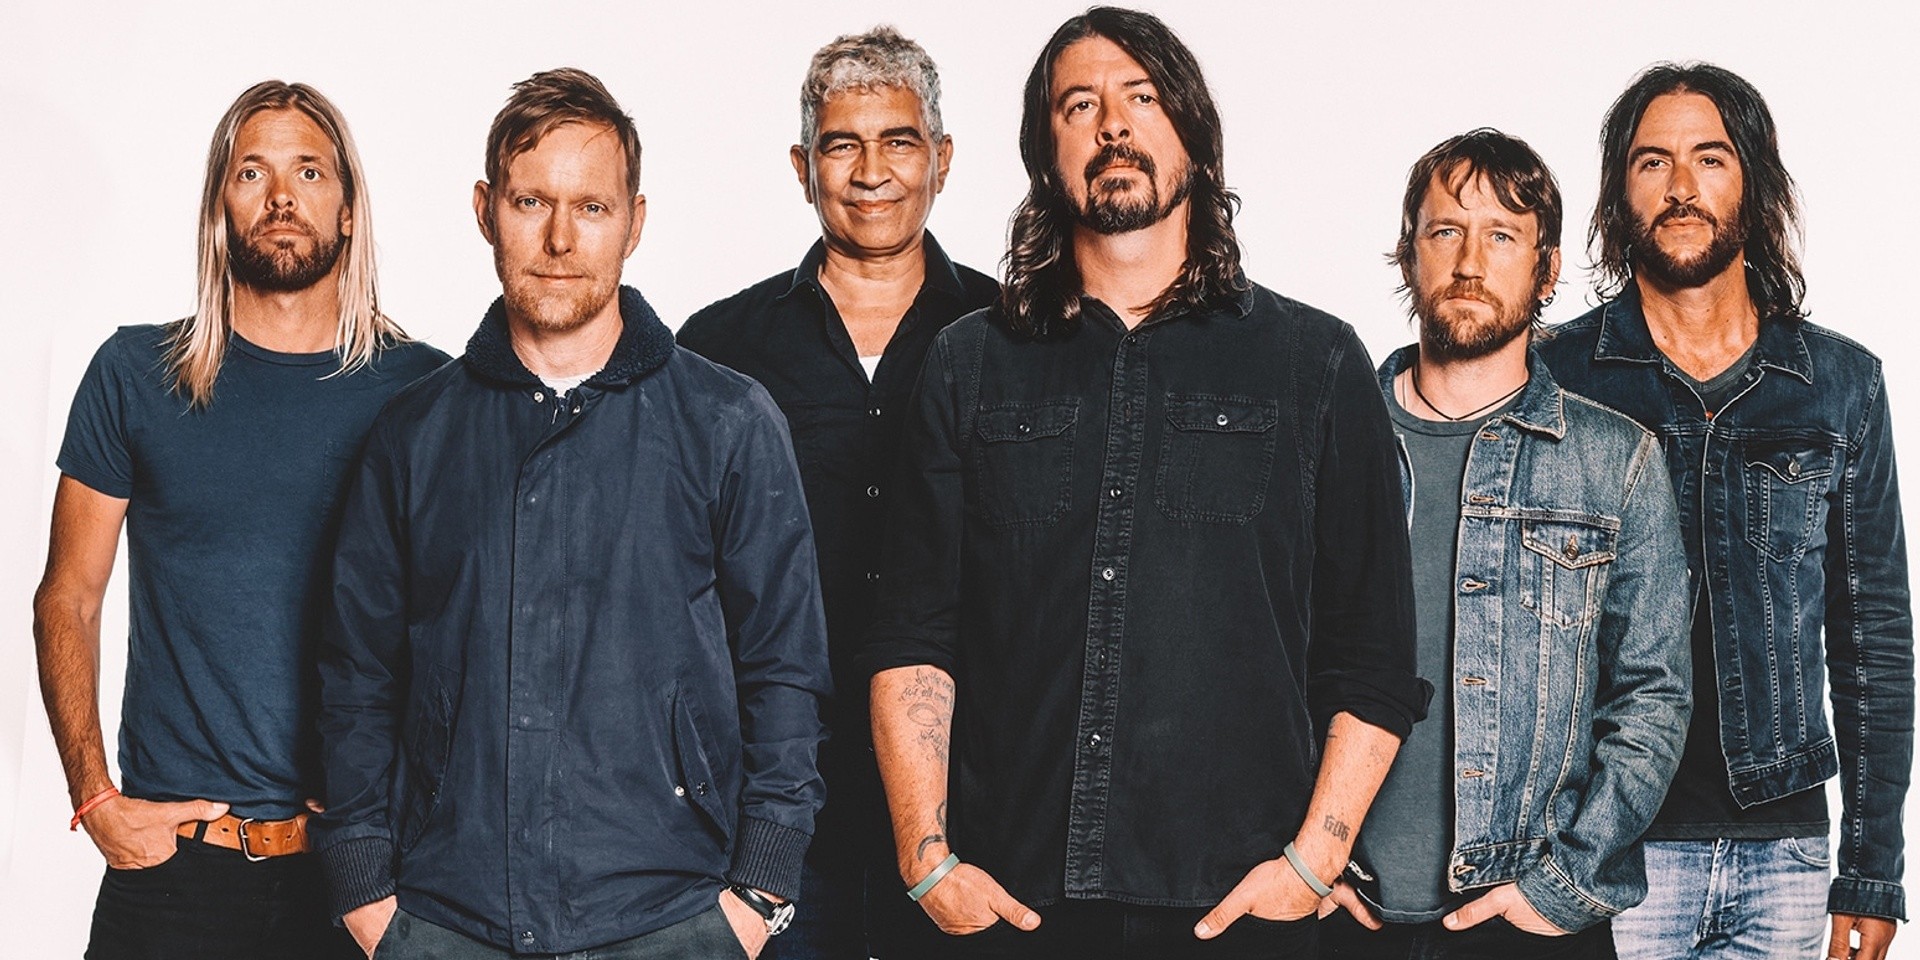 Foo Fighters tease new music, shares update on what to expect for its 25th anniversary